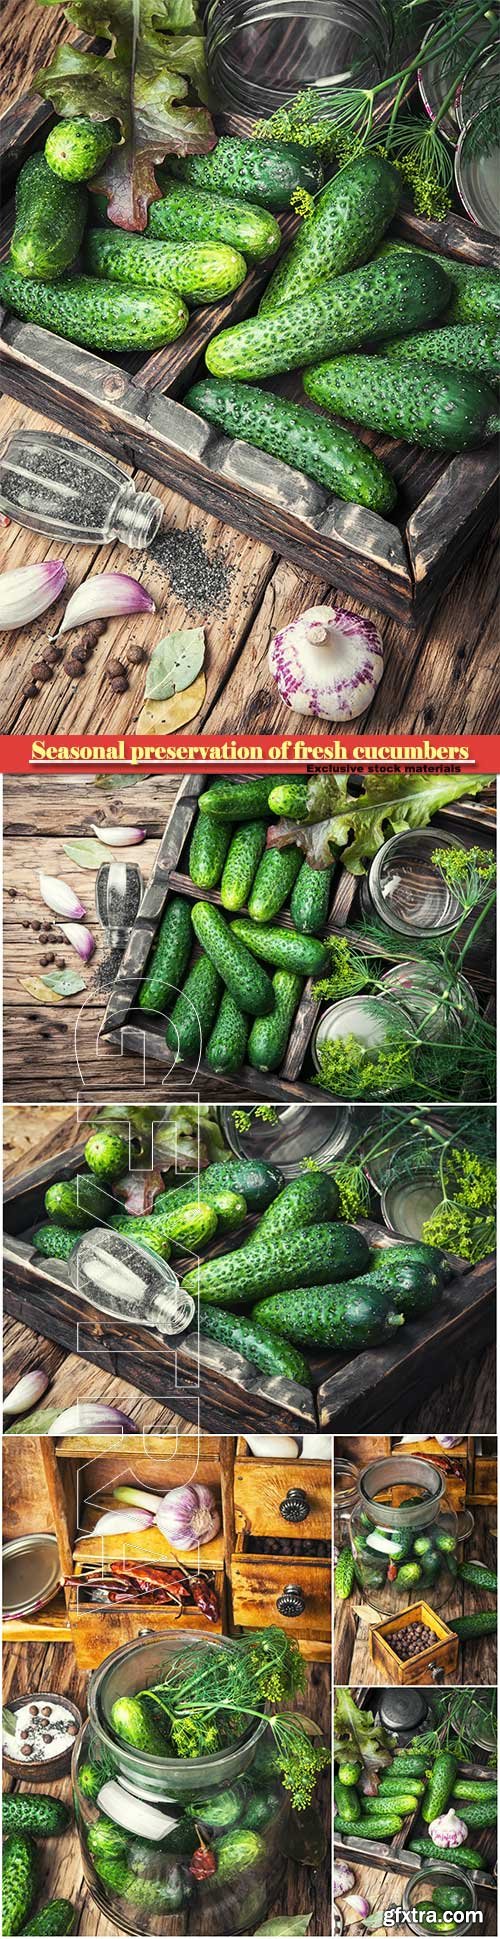 Seasonal preservation of fresh cucumbers for the winter